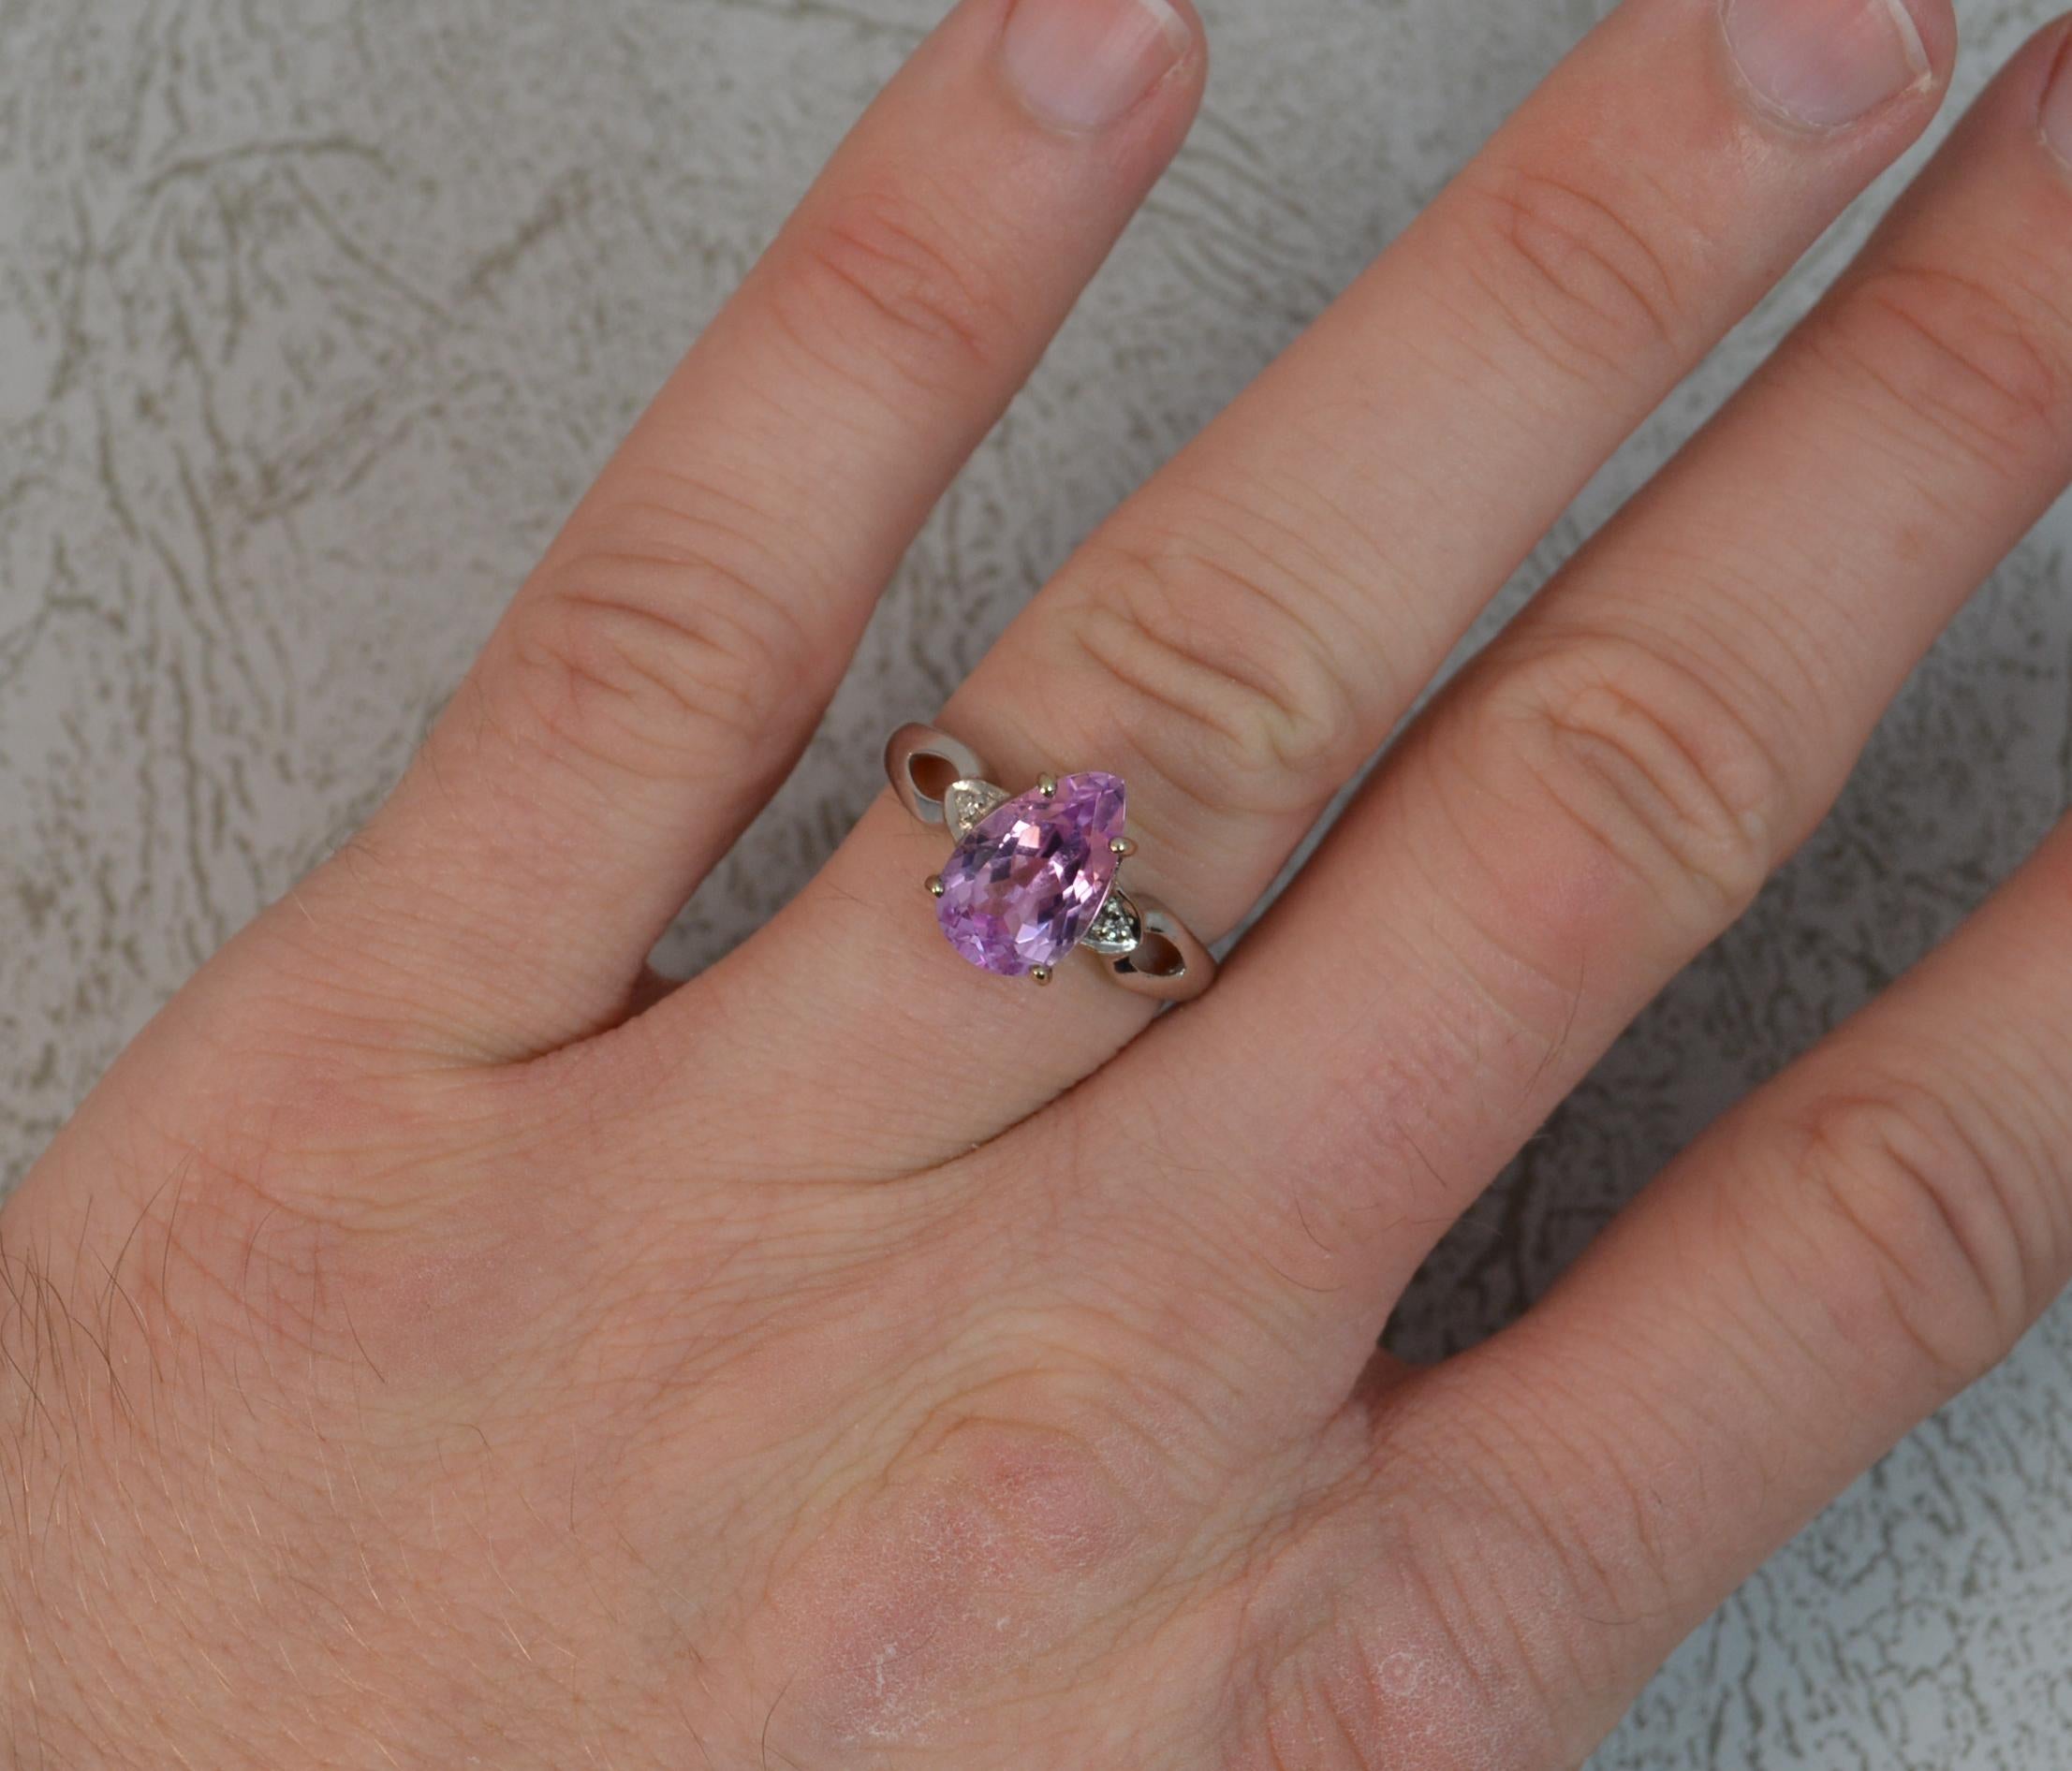 A superb contemporary ring.
Solid 18 carat white gold shank.
Designed with a pear cut pink kunzite to the centre in four claws.
Attractive pink coloured stone with a diamond to each side.
7.1mm x 11.1mm stone. Protruding 6.5mm off the